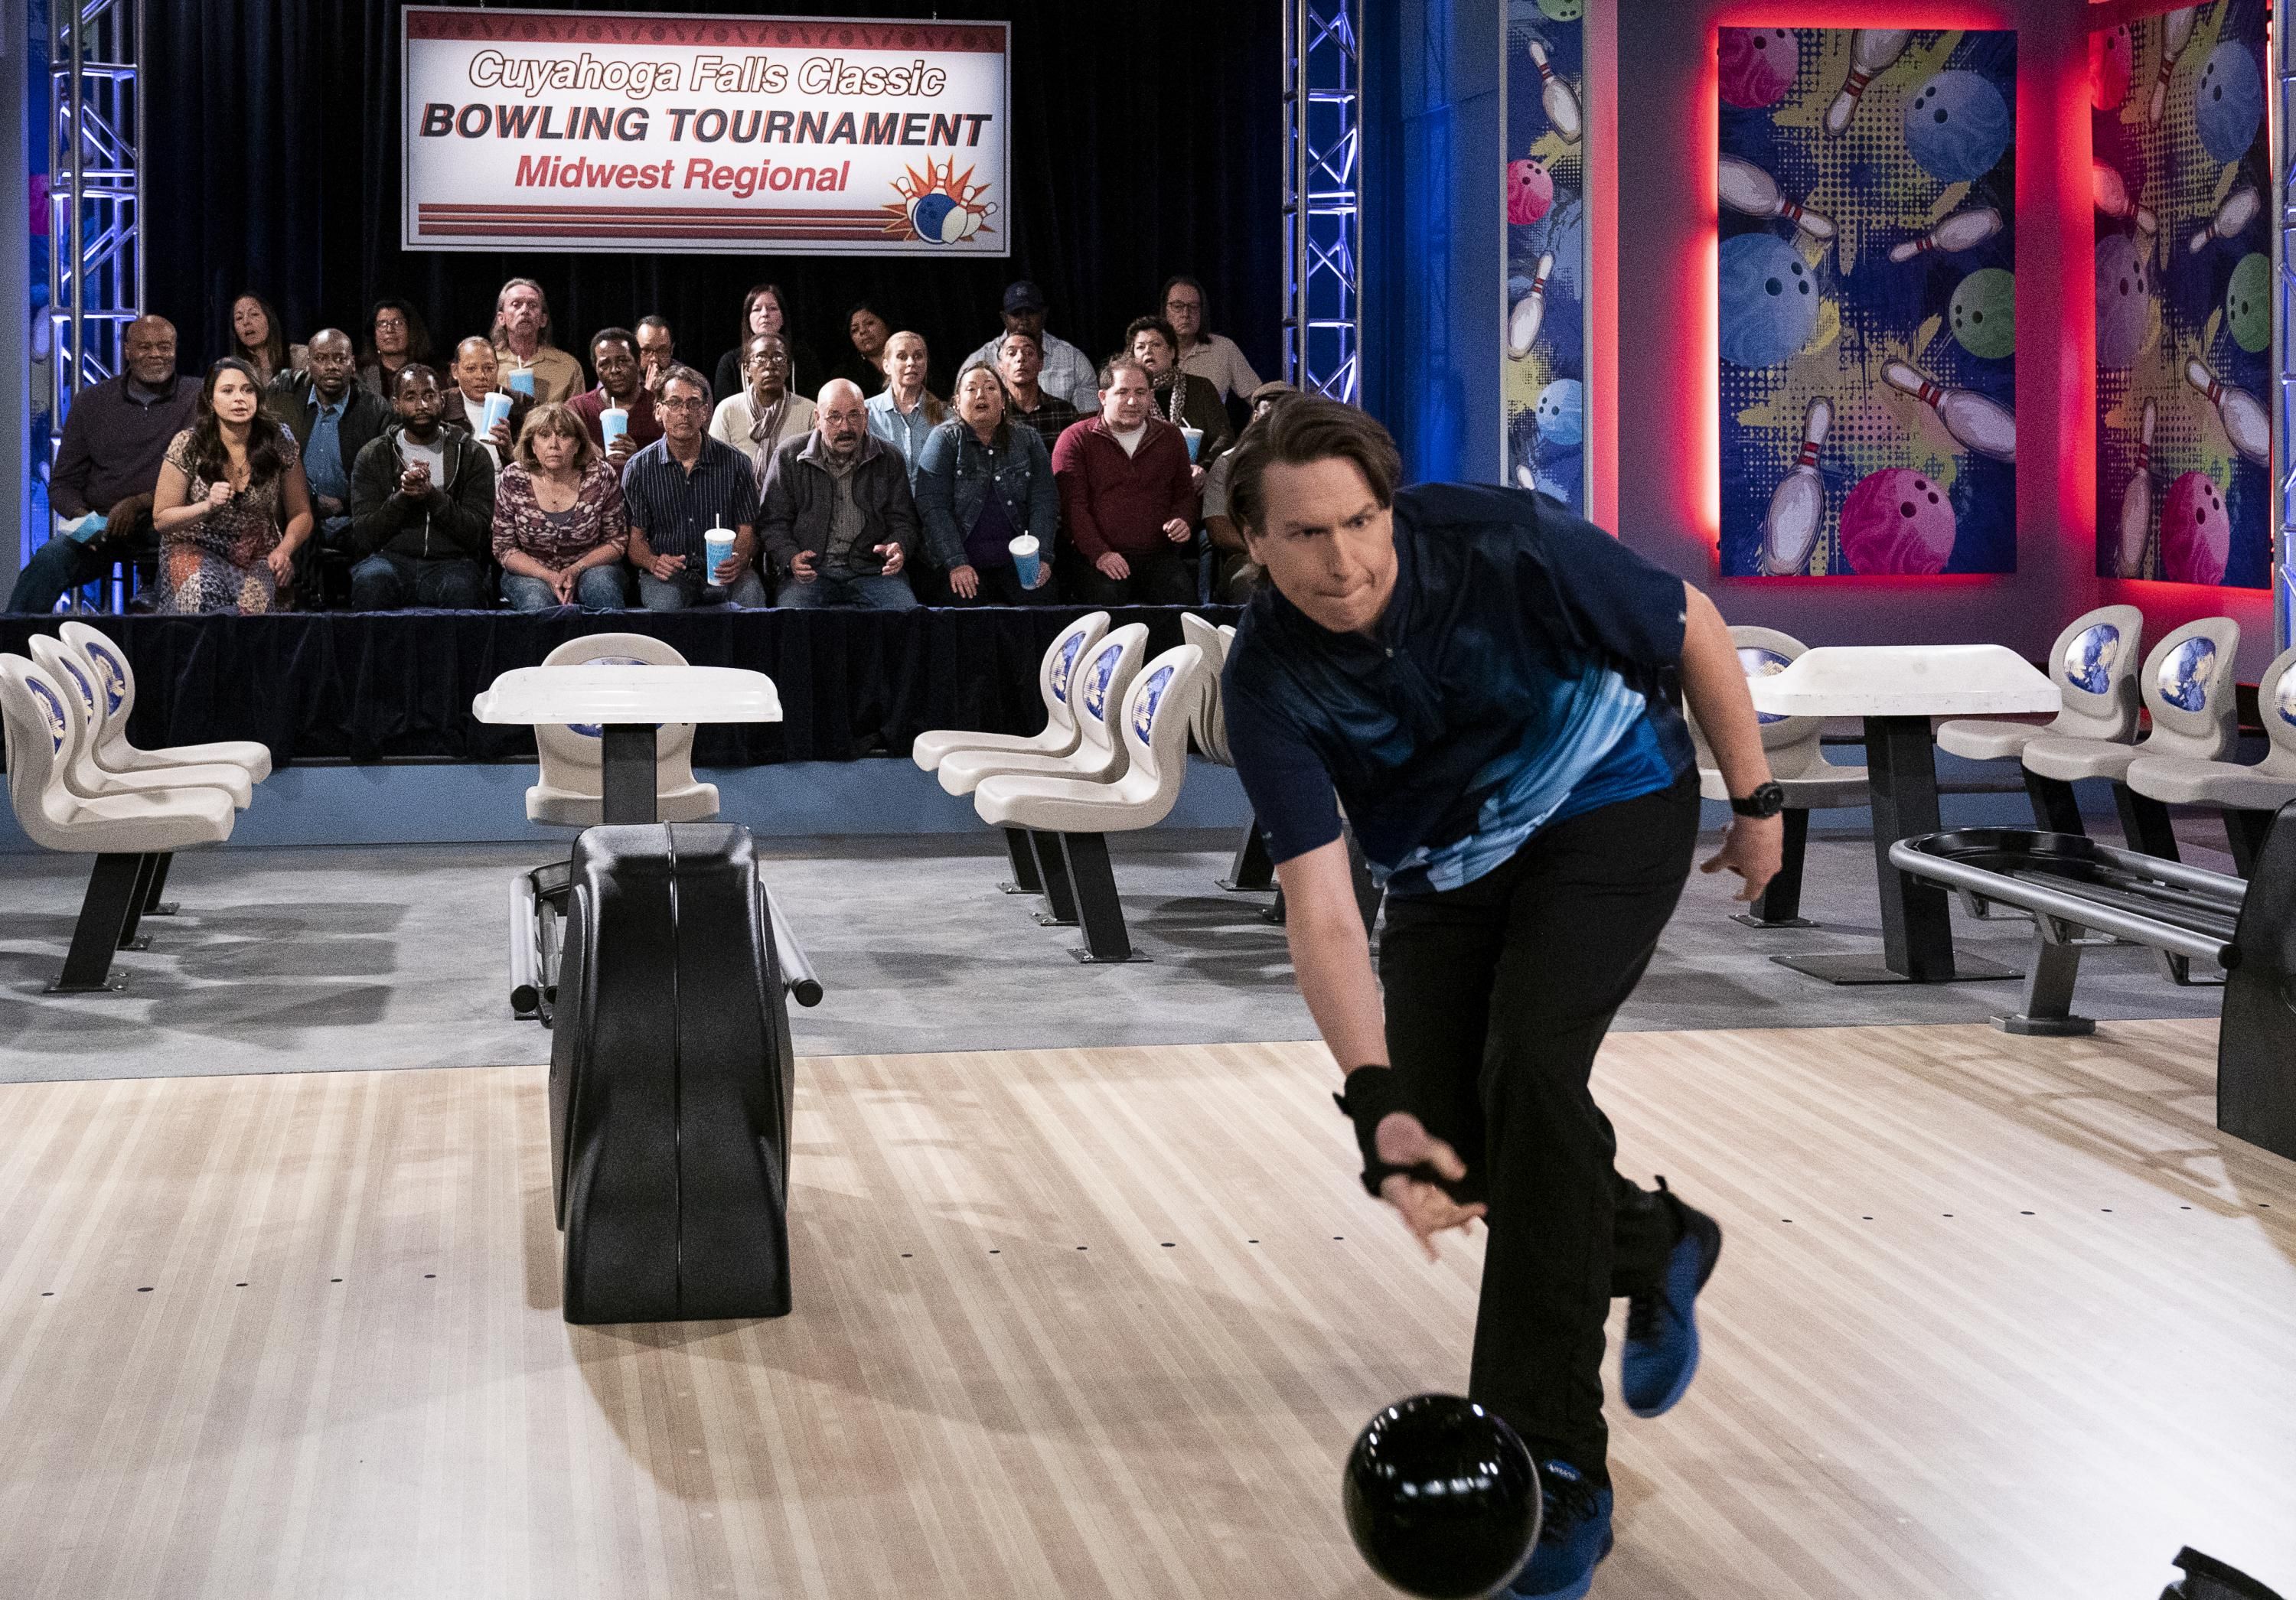 Pete Holmes as professional bowler Tom Smallwood throwing a black bowling ball with tournament onlookers in the background